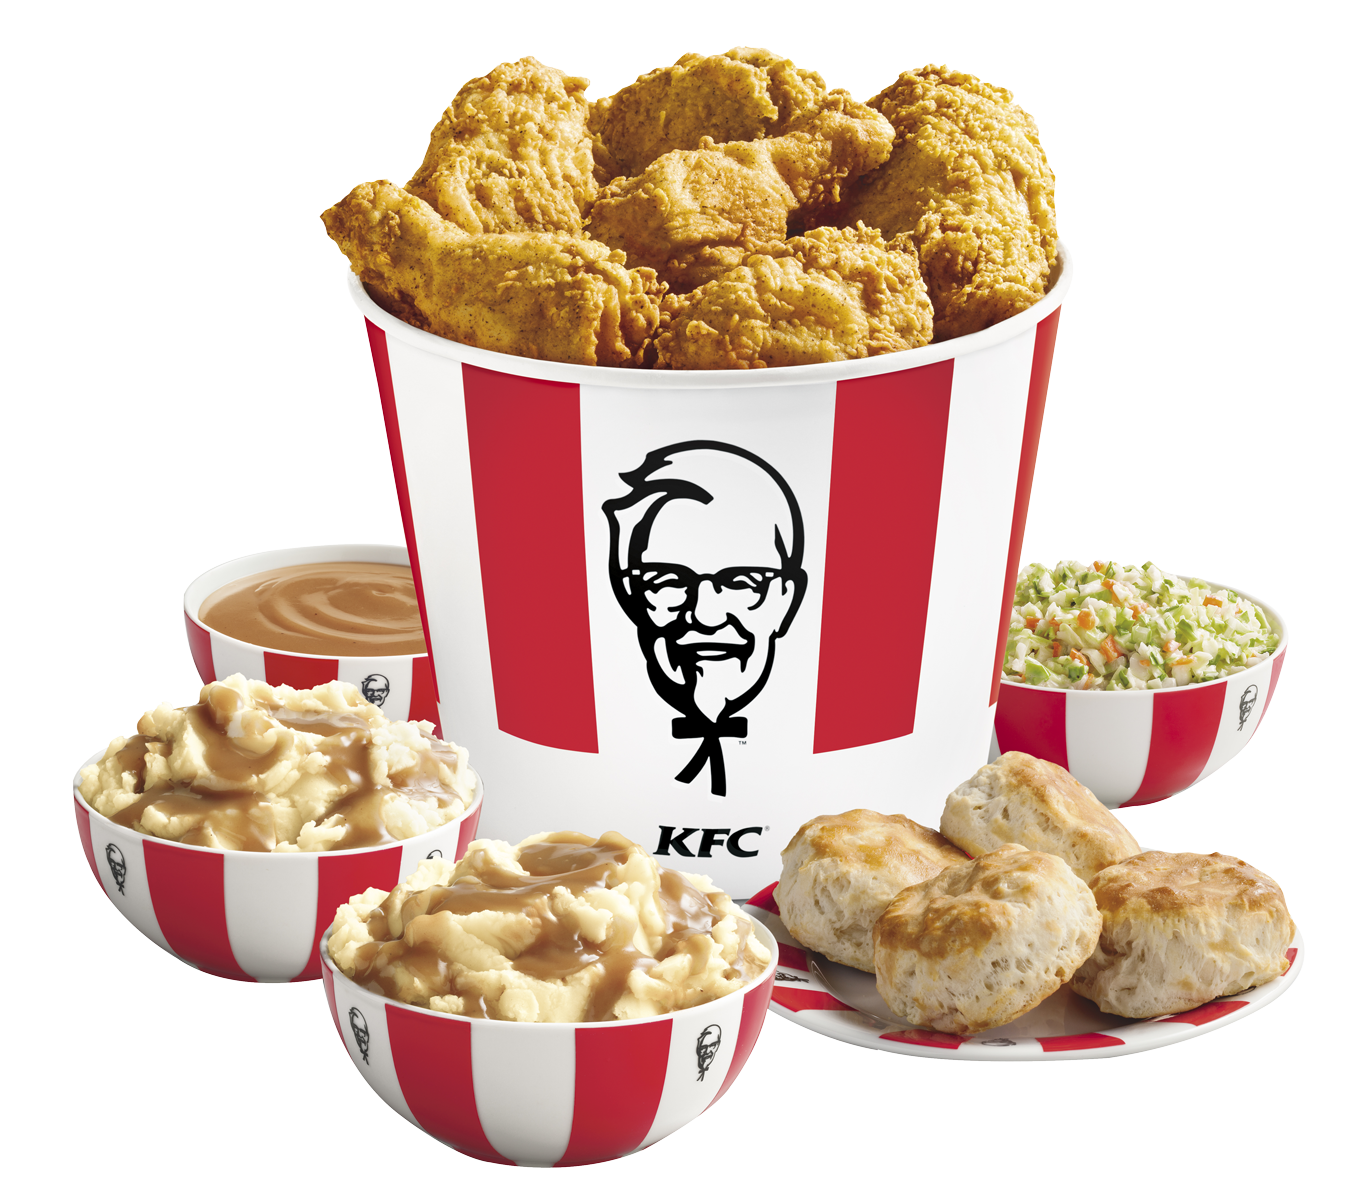 A Bucket Of Fried Chicken And Other Food